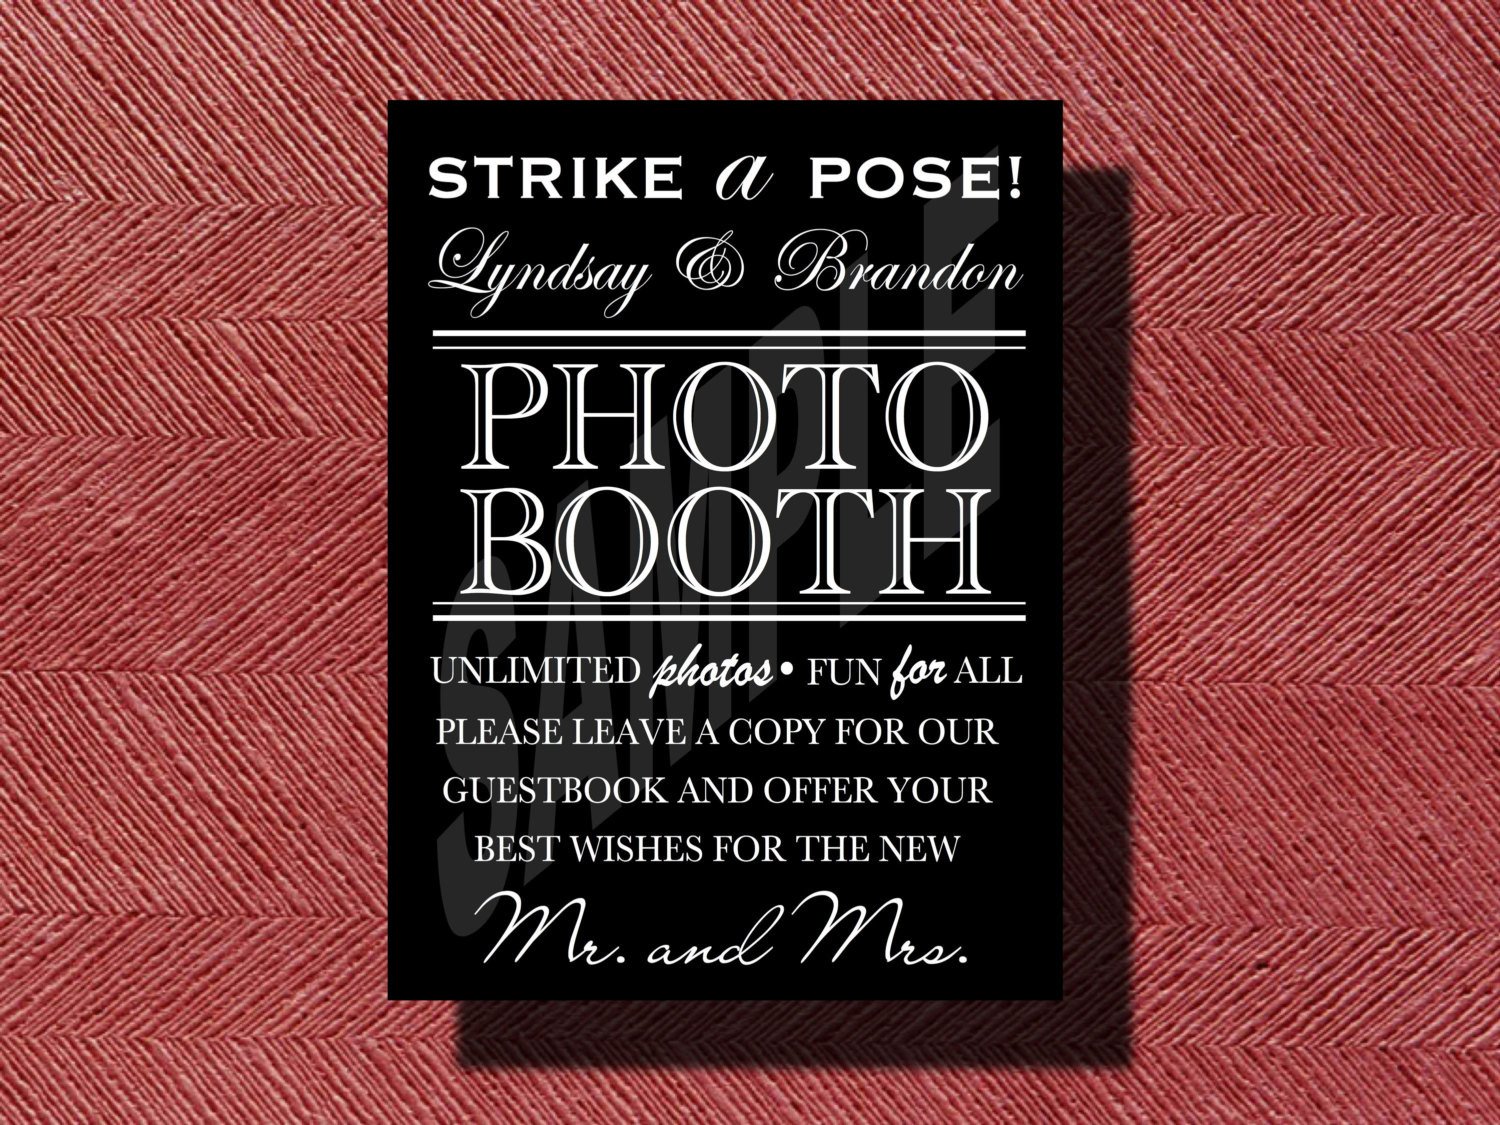 Wedding Guest Book For Photo Booth
 Wedding Booth Guestbook Sign